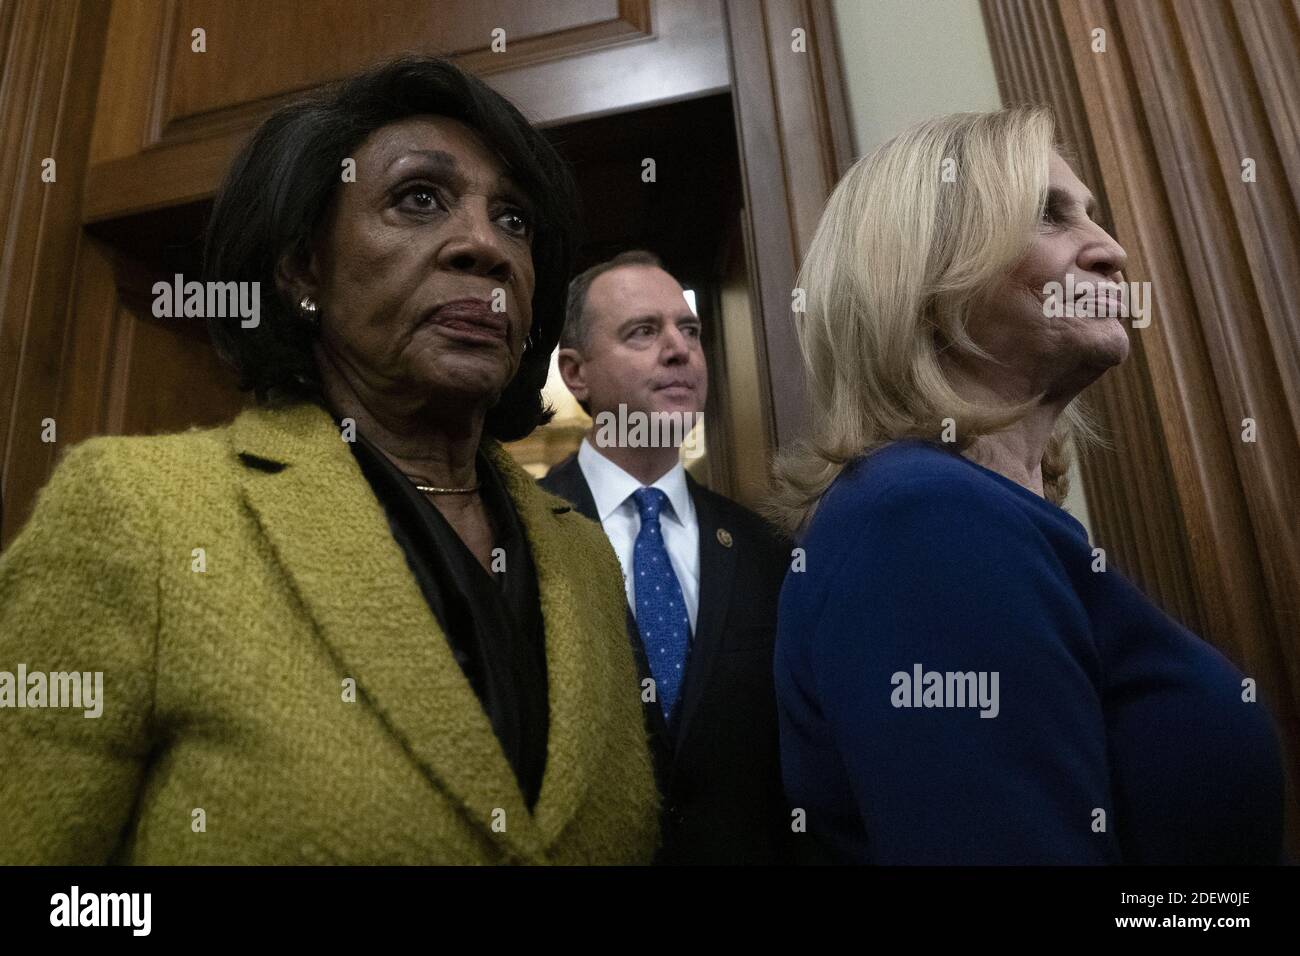 From left to right: United States Representative Maxine Waters (Democrat of California), United States Representative Adam Schiff (Democrat of California), and United States Representative Carolyn Maloney (Democrat of New York), United States enter a press conference after the United States House of Representatives voted to impeach United States President Donald J. Trump at the United States Capitol in Washington, DC, USA on Wednesday, December 18, 2019. Photo by Stefani Reynolds/CNP/ABACAPRESS.COM Stock Photo